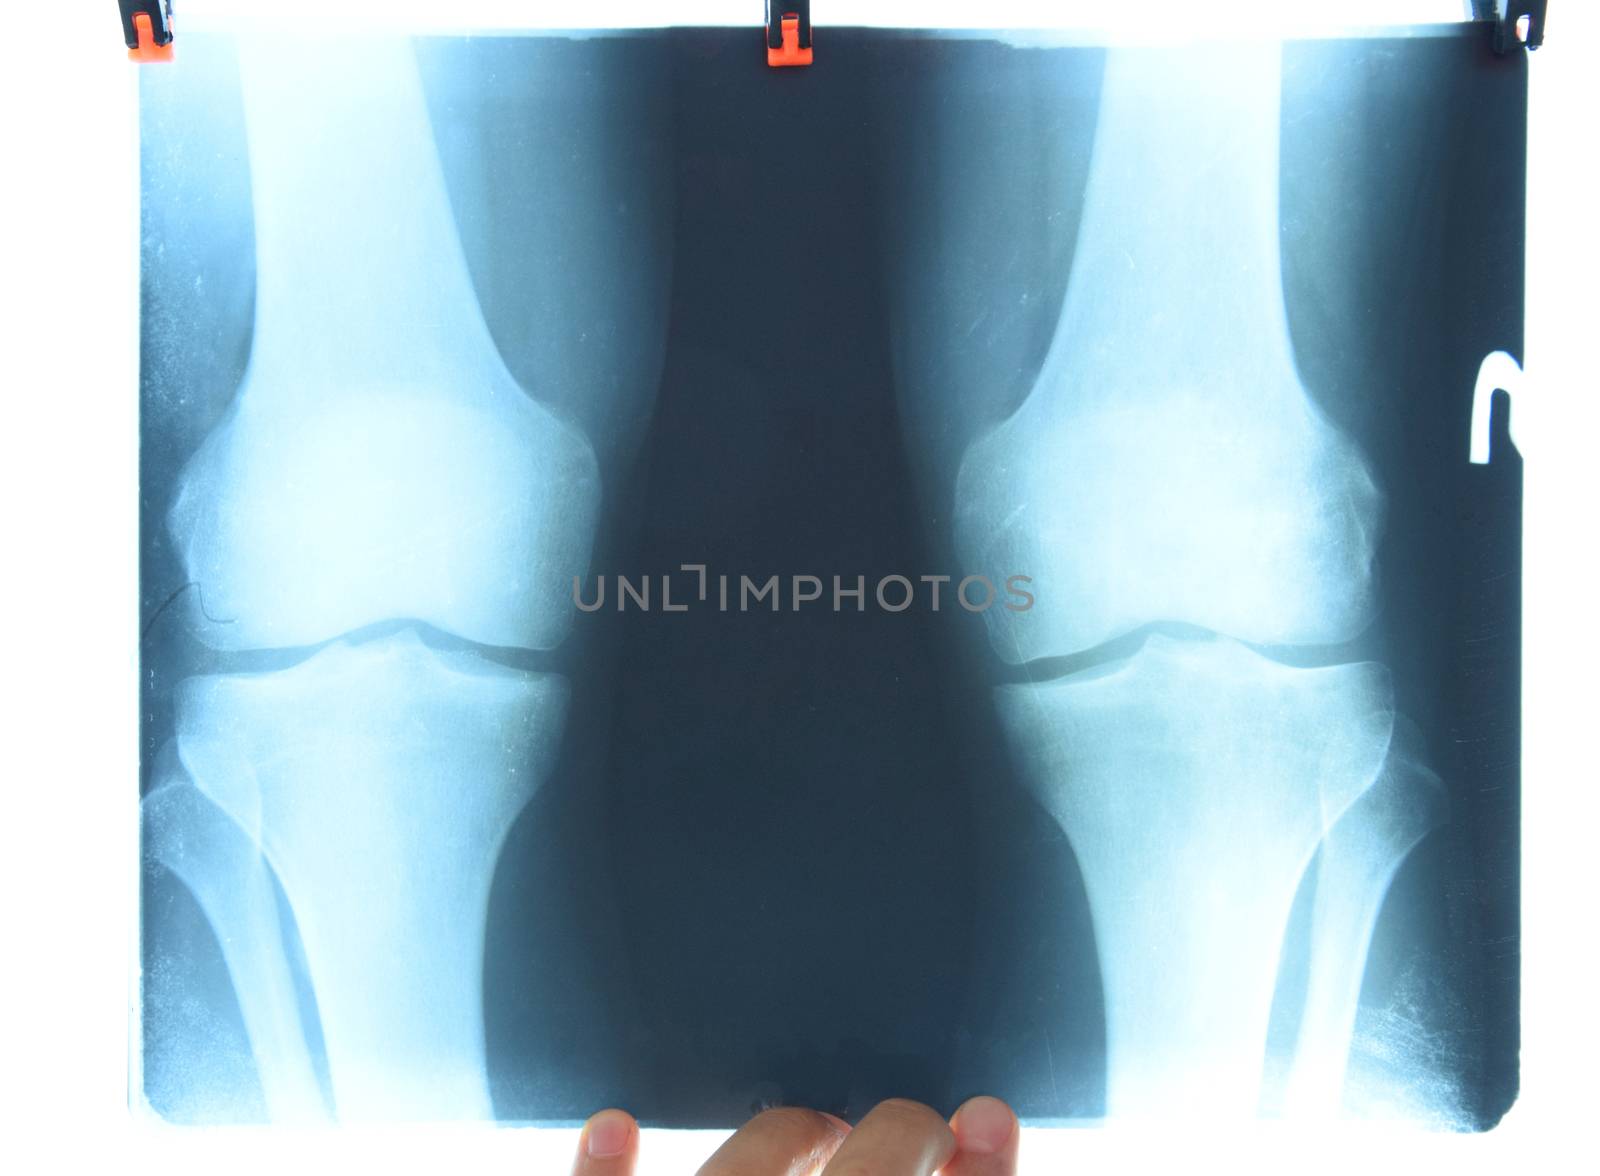 X-ray of the knee joints, a picture of the bones of the knee on the x-ray.